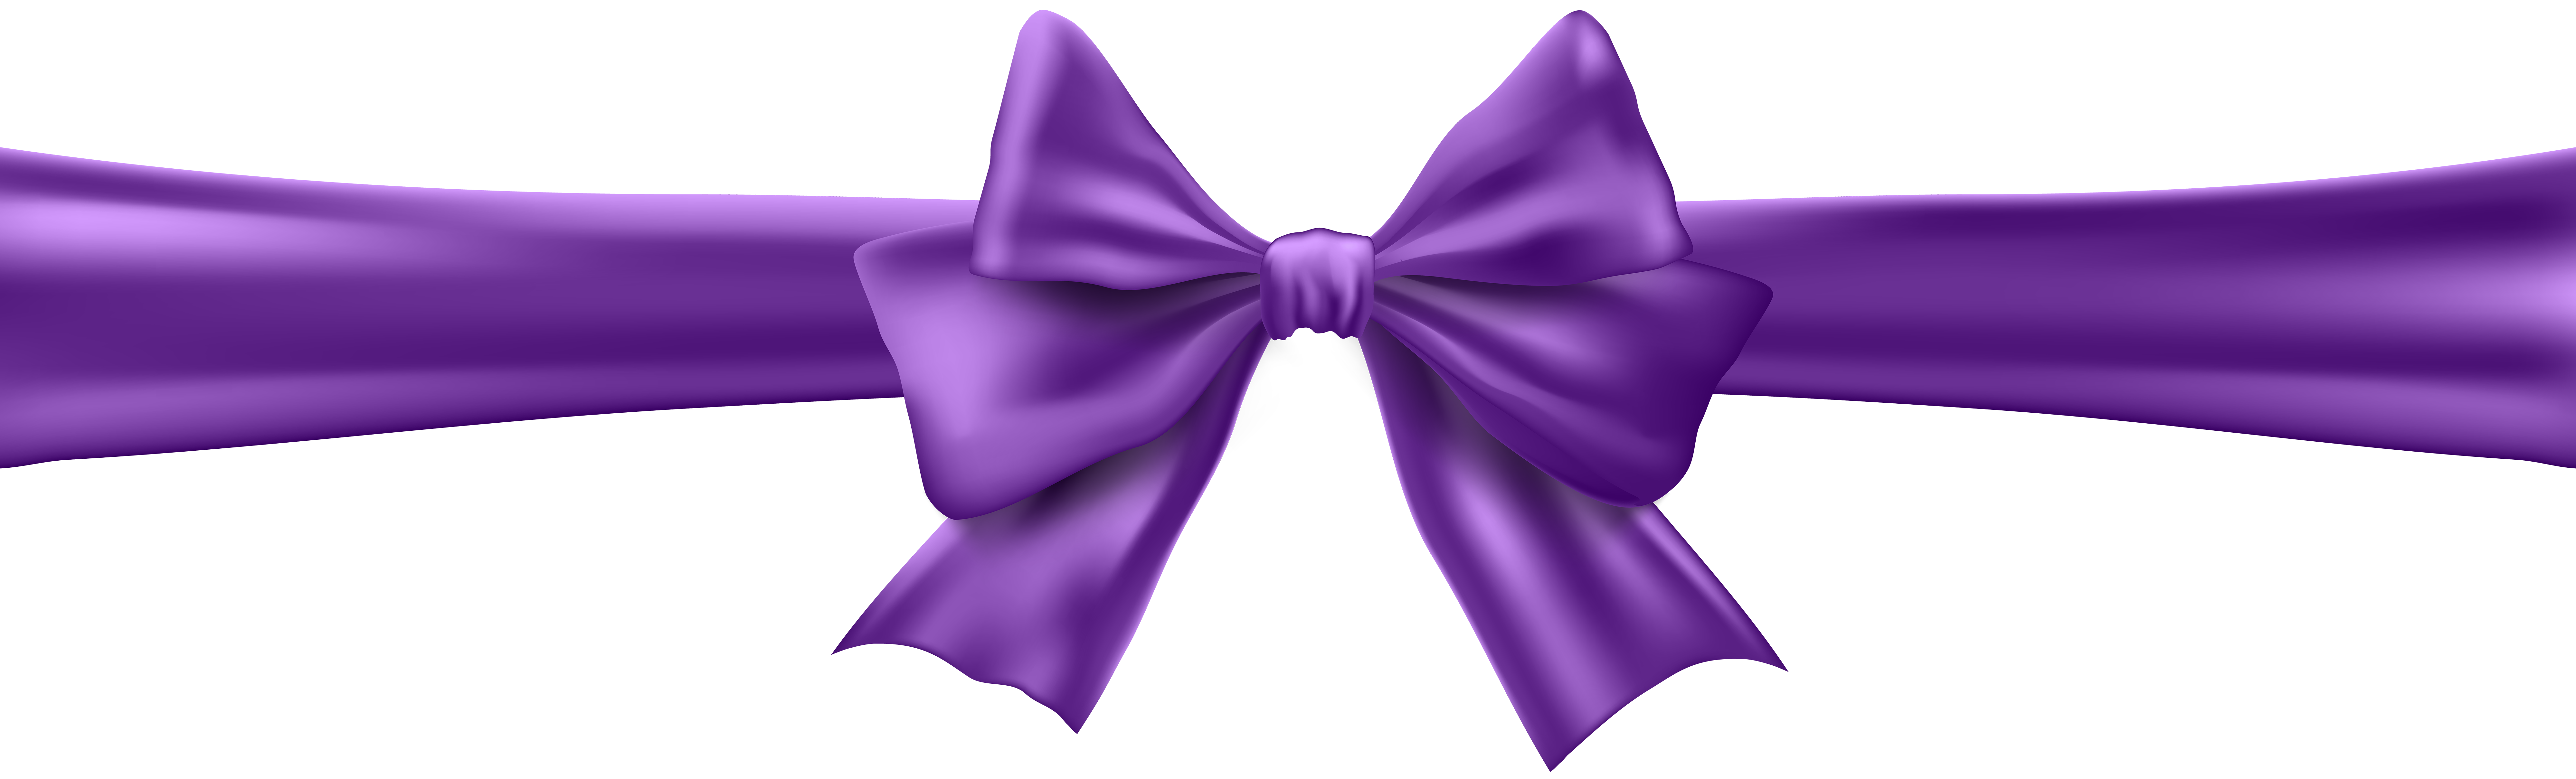 Purple Bow with Ribbon Clip Art Image.